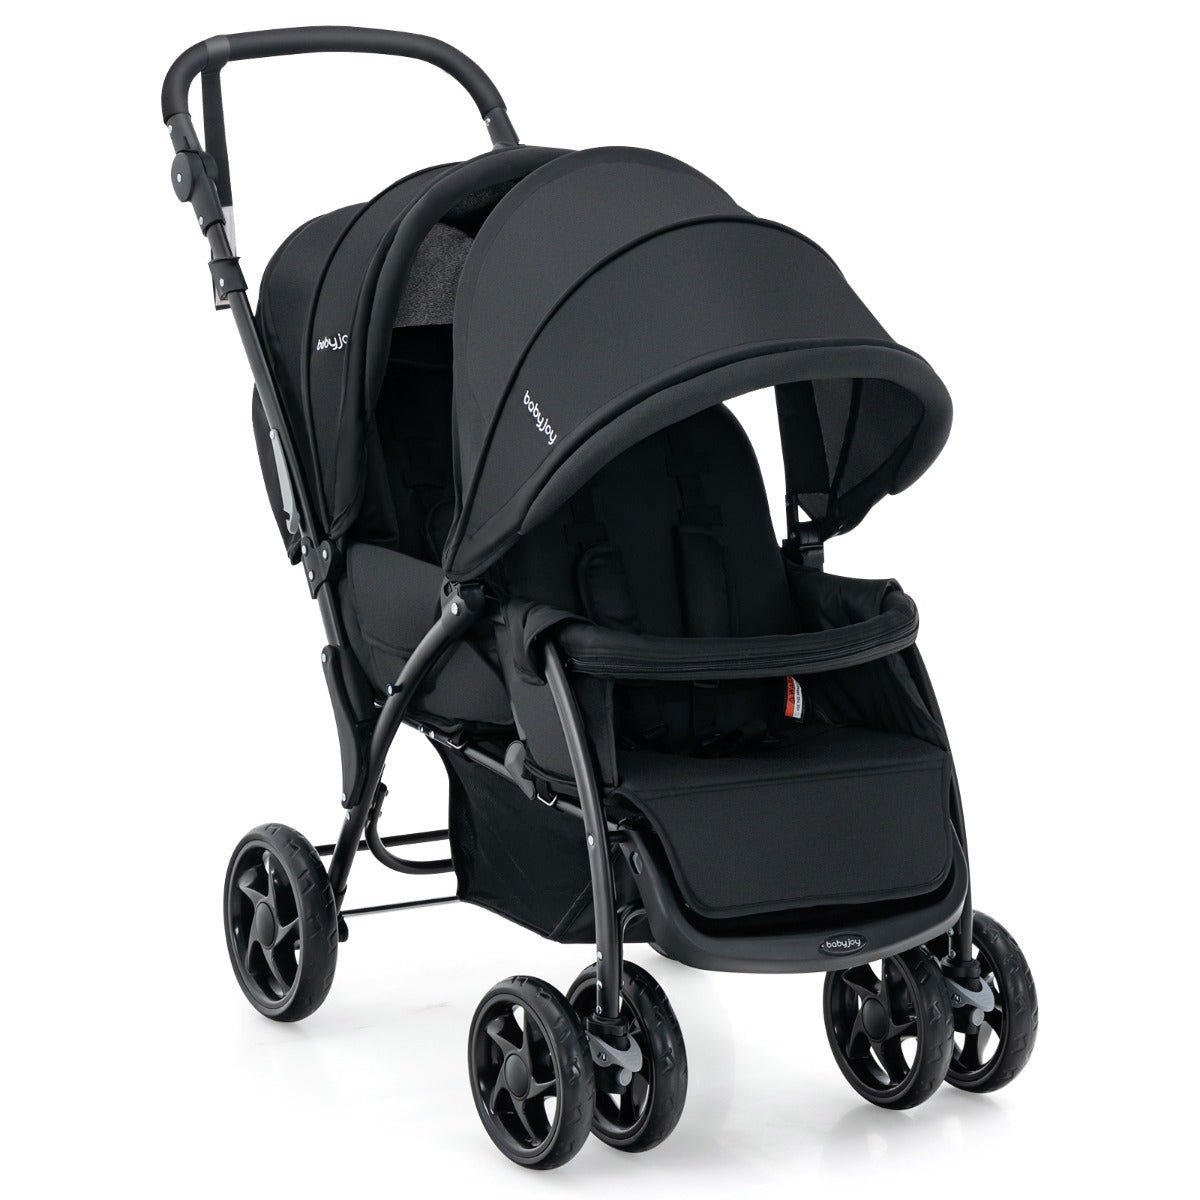 Black Double Baby Stroller - Tandem Seating and Canopy